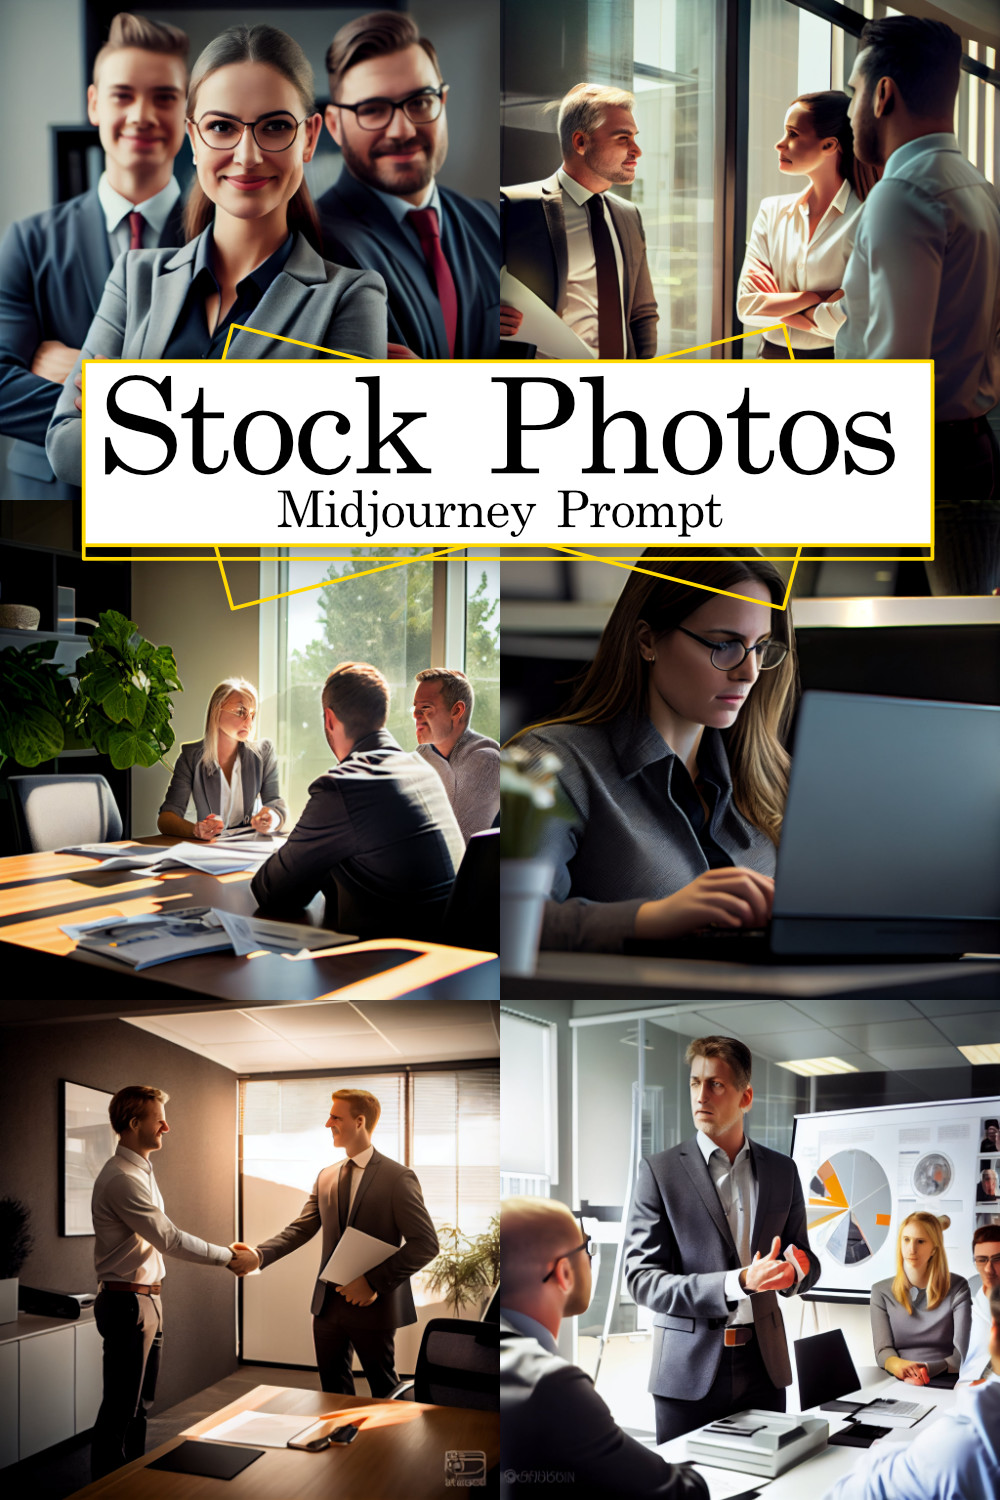 Company Employees Stock Photos Midjourney Prompt pinterest preview image.